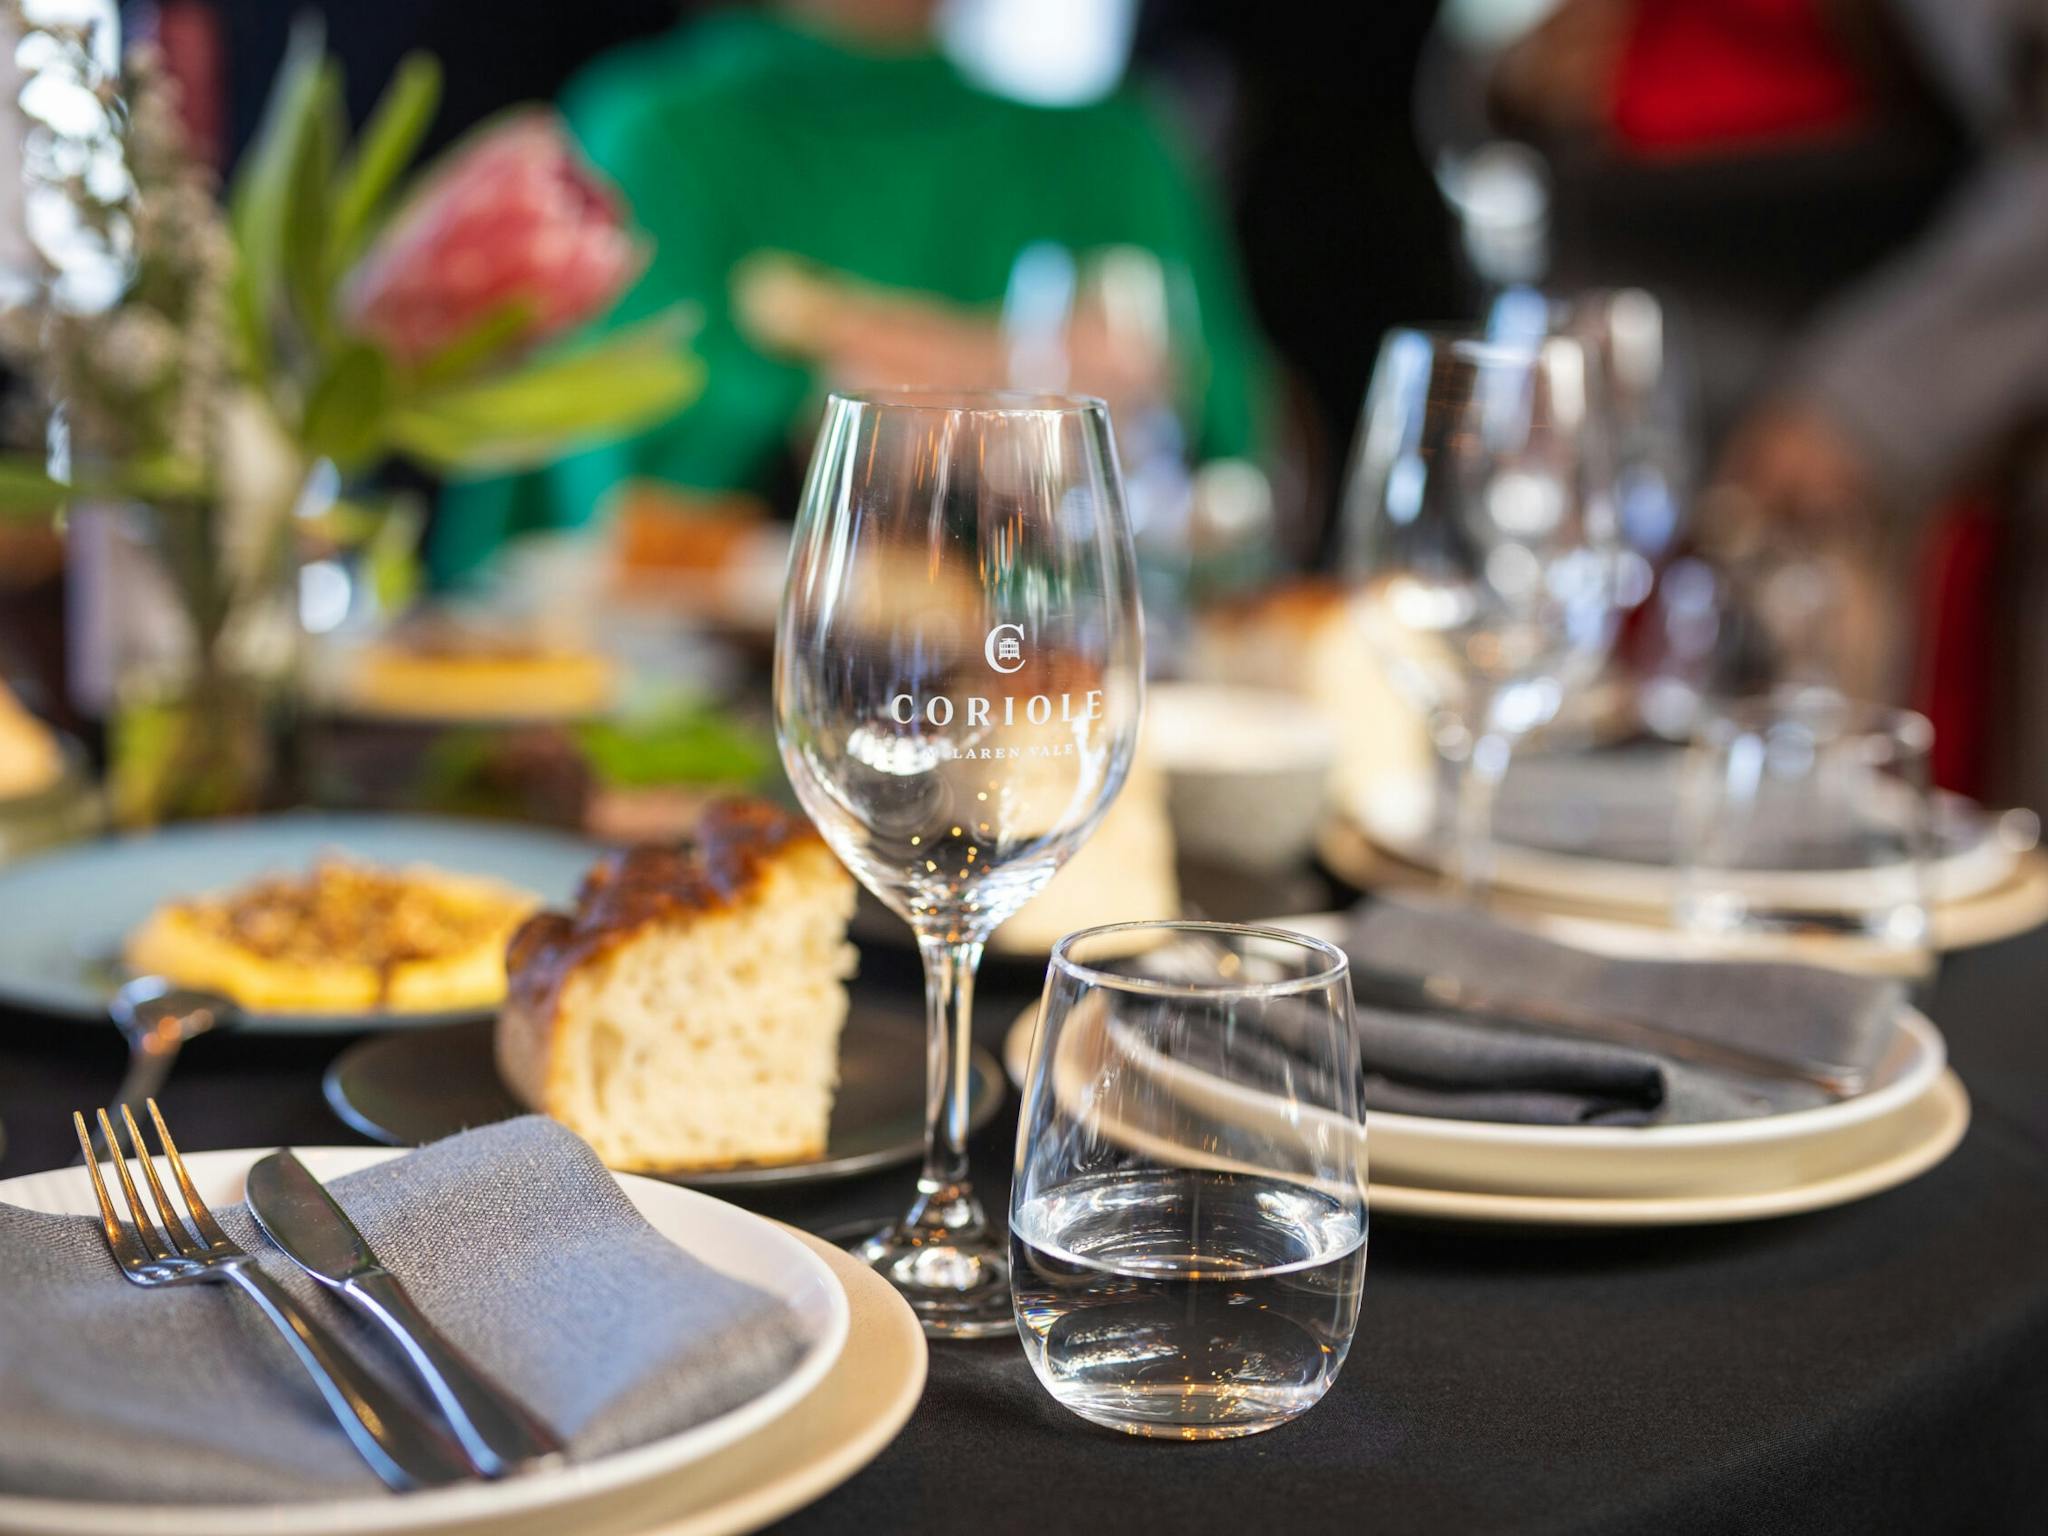 Food and wine at the lunches and dinners, included in the festival offering